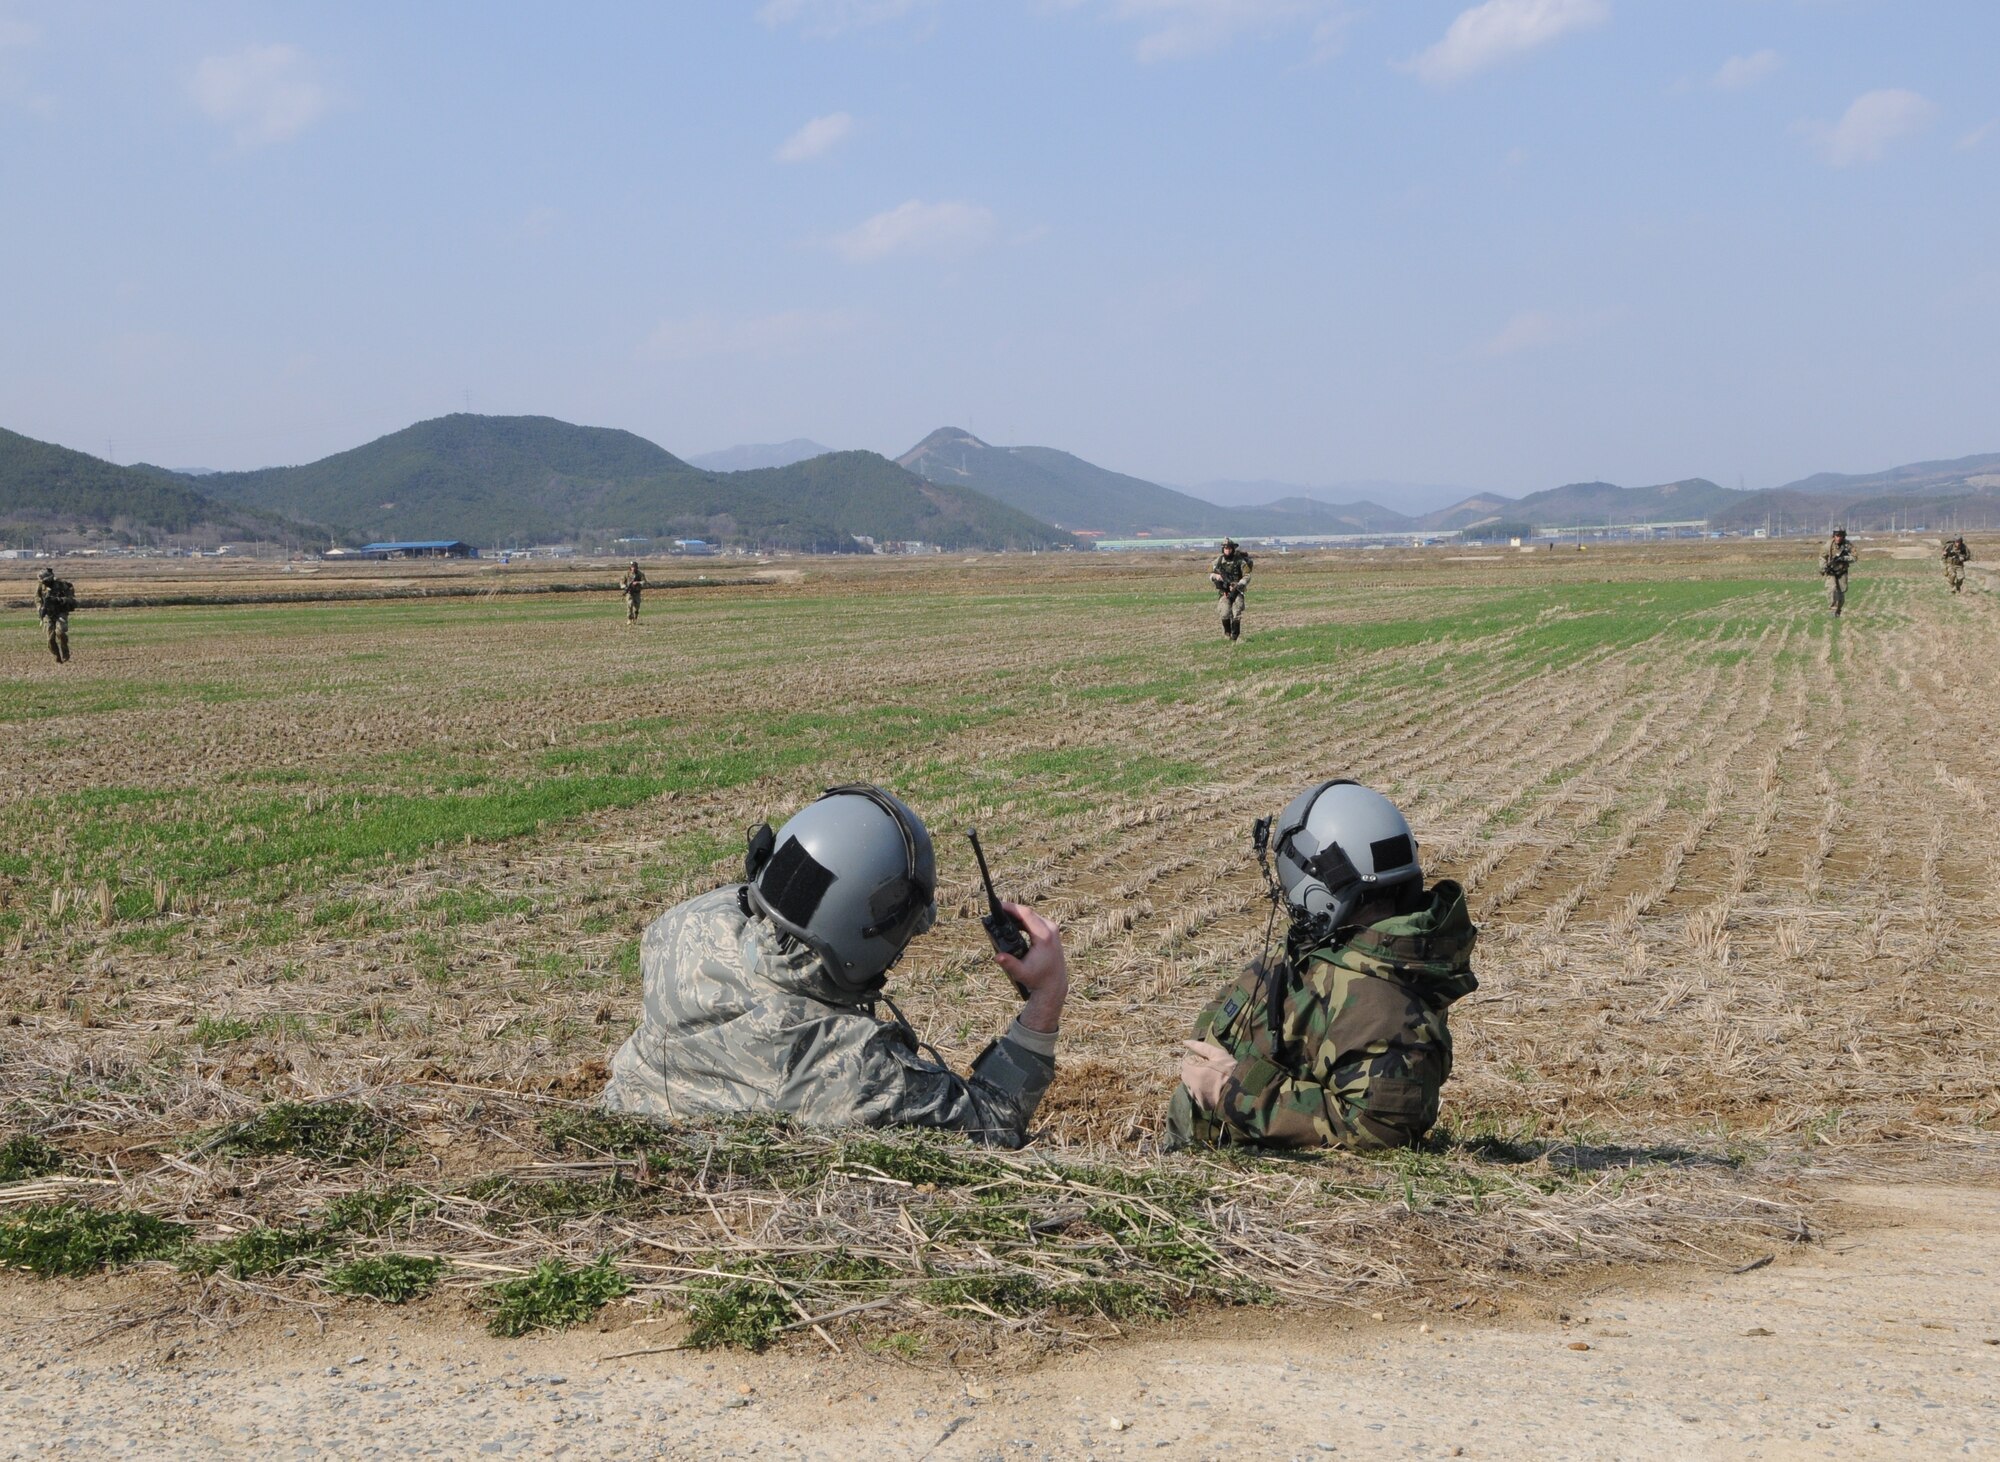 NEAR AN’GANG, Republic of Korea -- Pararescuemen and a combat controller from the 320th Special Tactics Squadron approach simulated wounded aircrew members during a combat search and rescue exercise here March 26. The scenario is part of the 353rd Special Operations Group’s annual operational readiness exercise. (U.S. Air Force photo by Tech. Sgt. Aaron Cram)